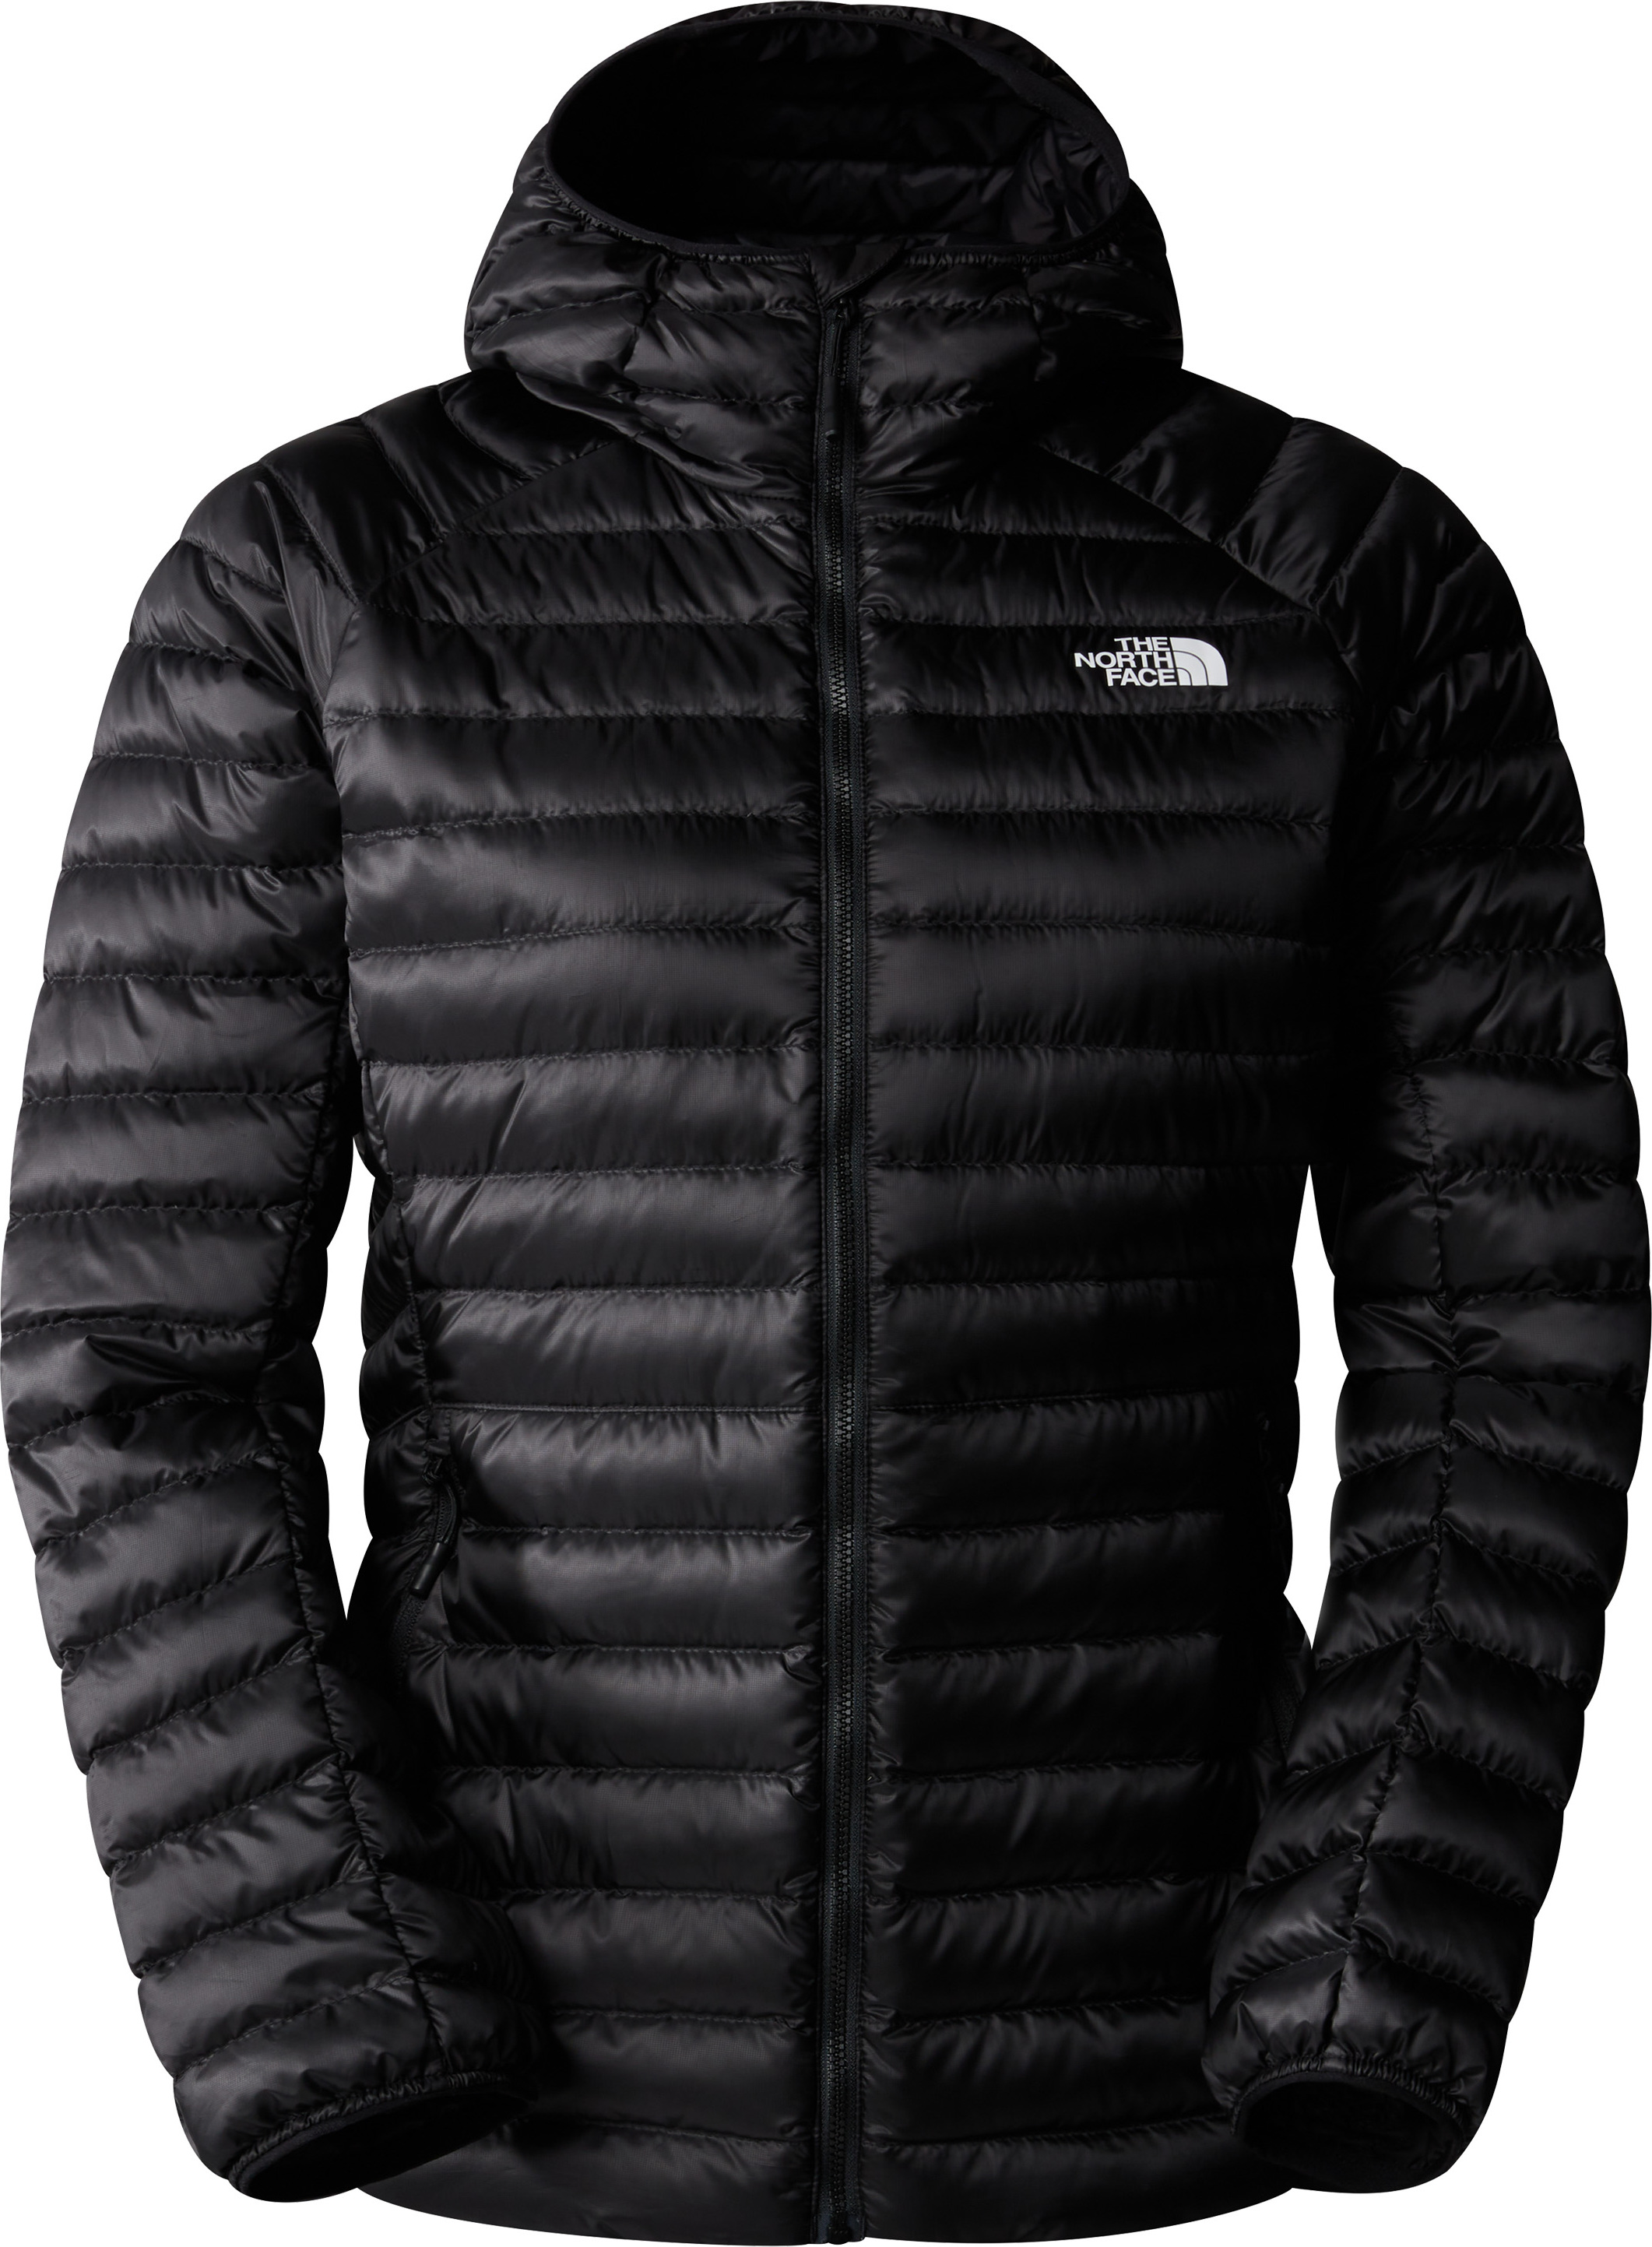 The North Face The North Face W Bettaforca Lt Down Hoodie TNF Black/TNF Black S, Tnf Black/Tnf Black